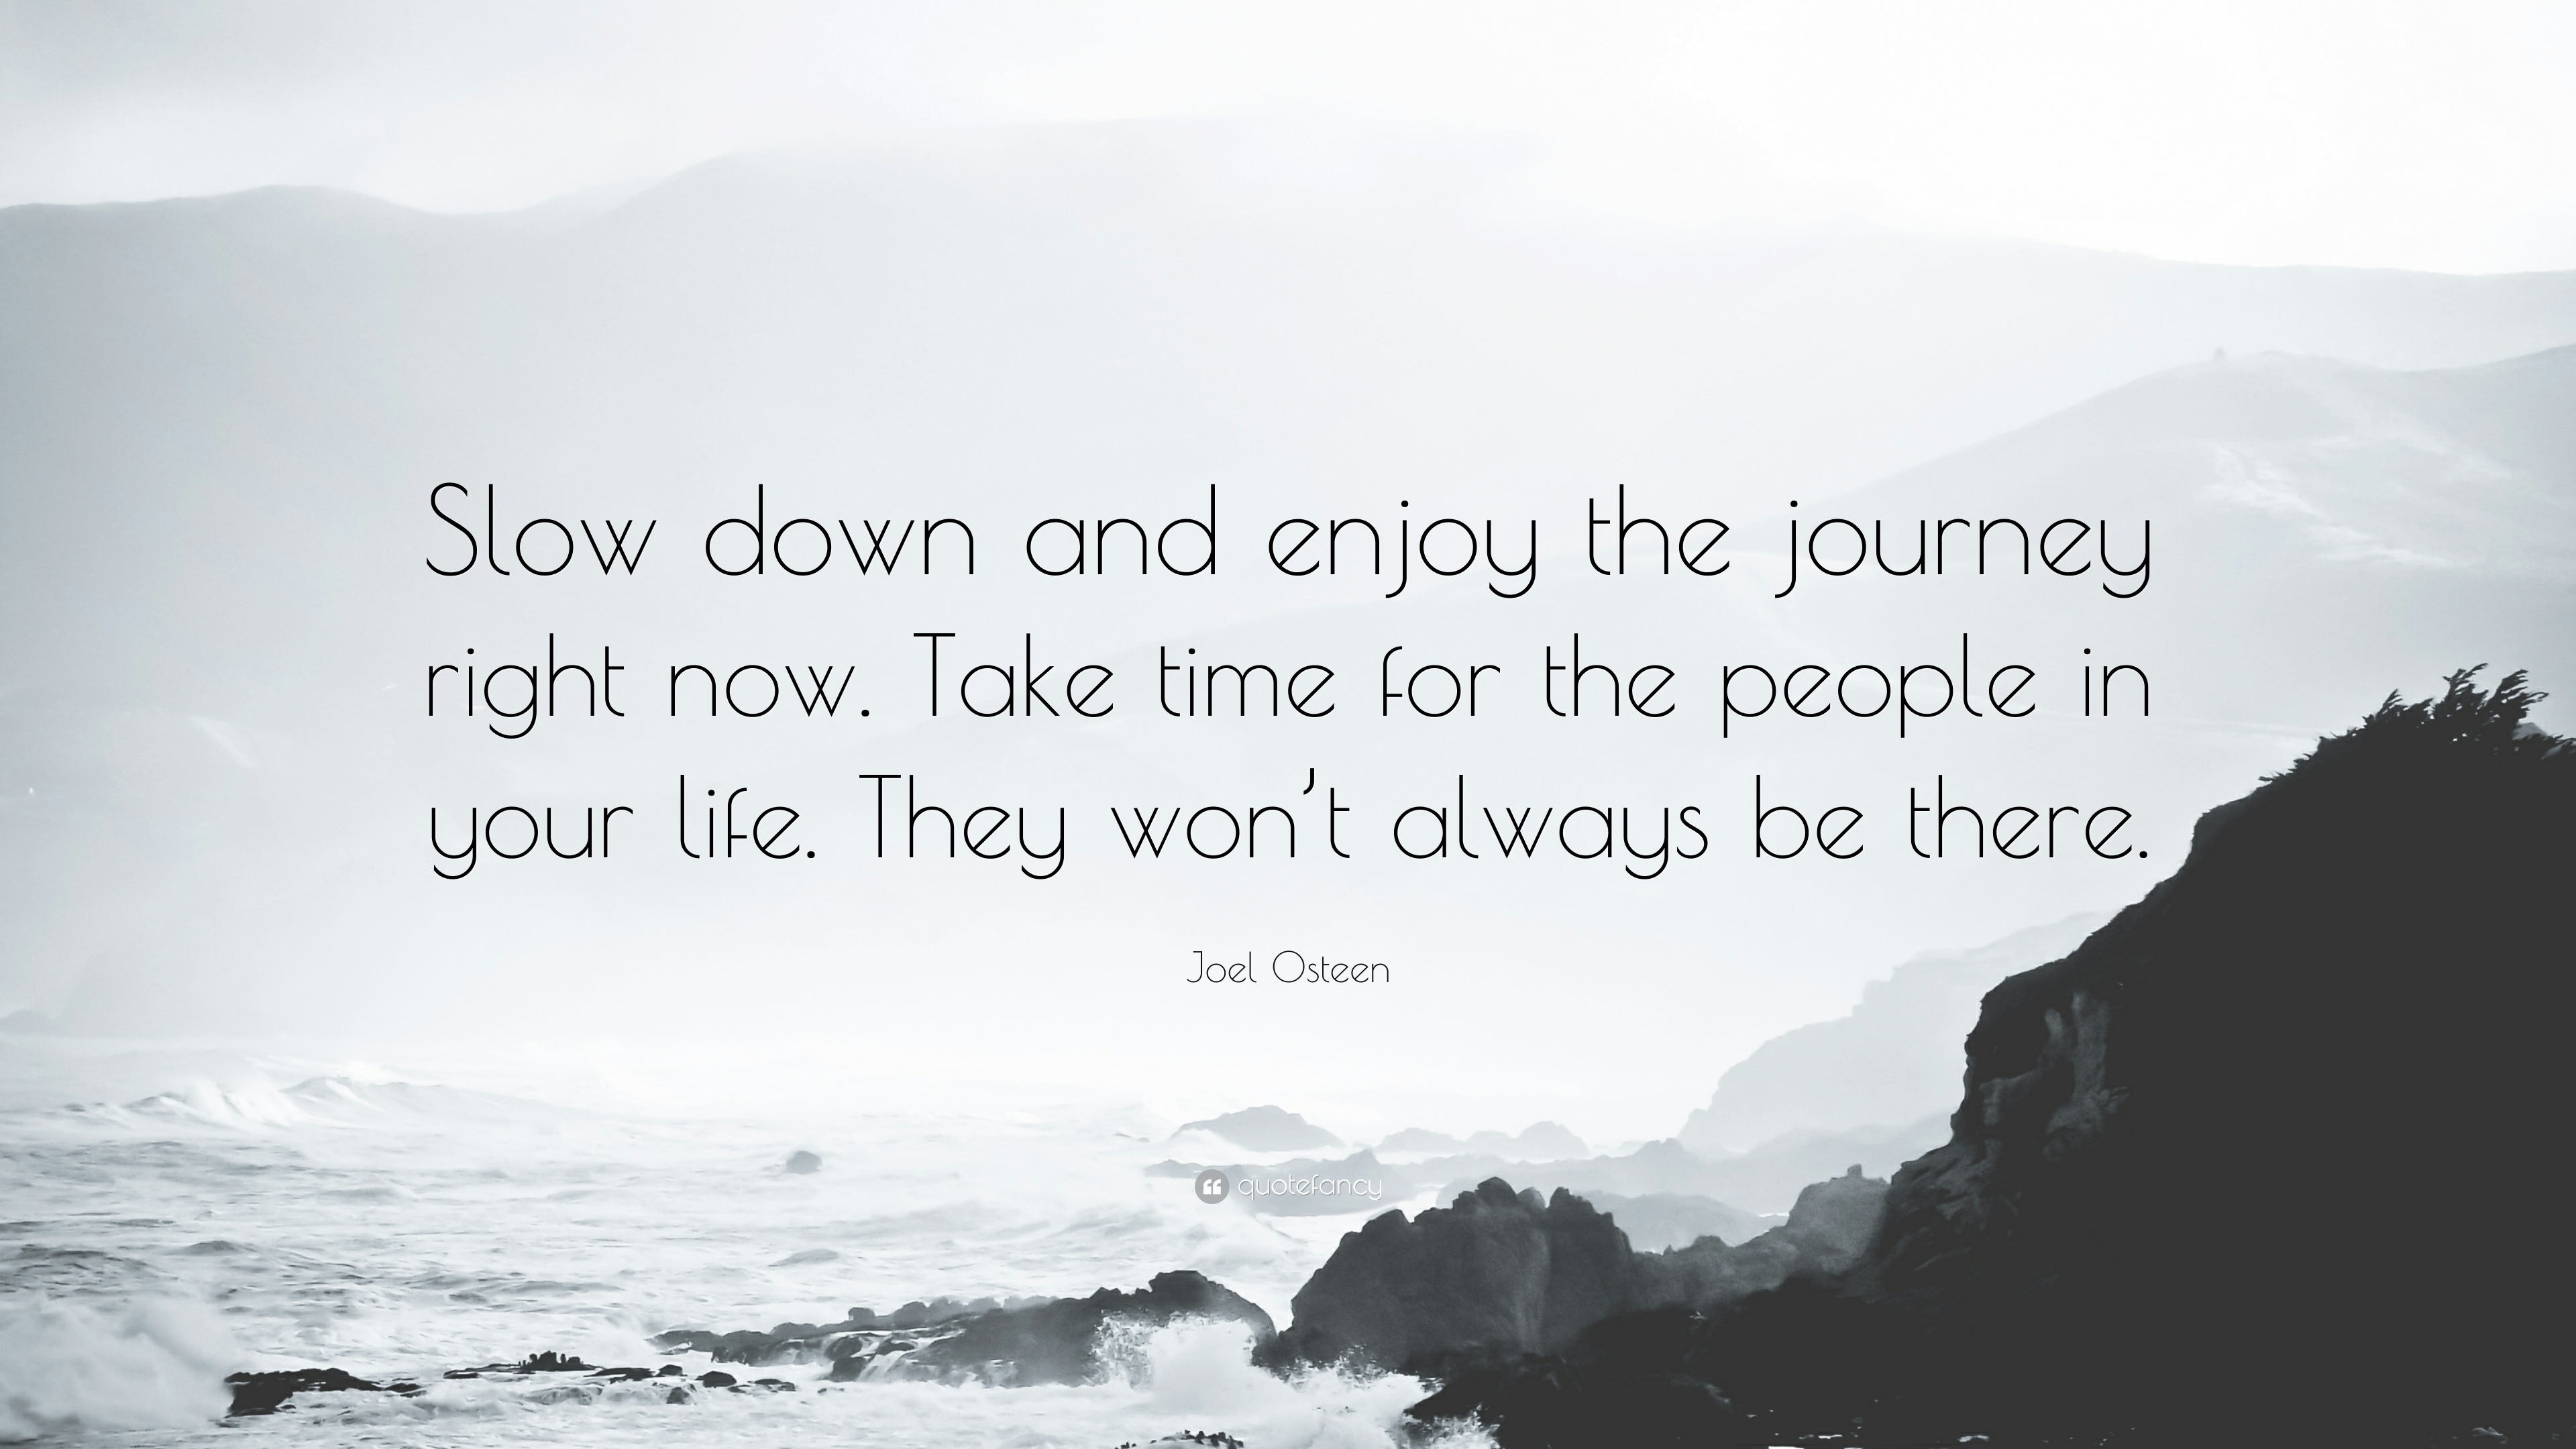 Joel Osteen Quote: “Slow down and enjoy the journey right now. Take ...